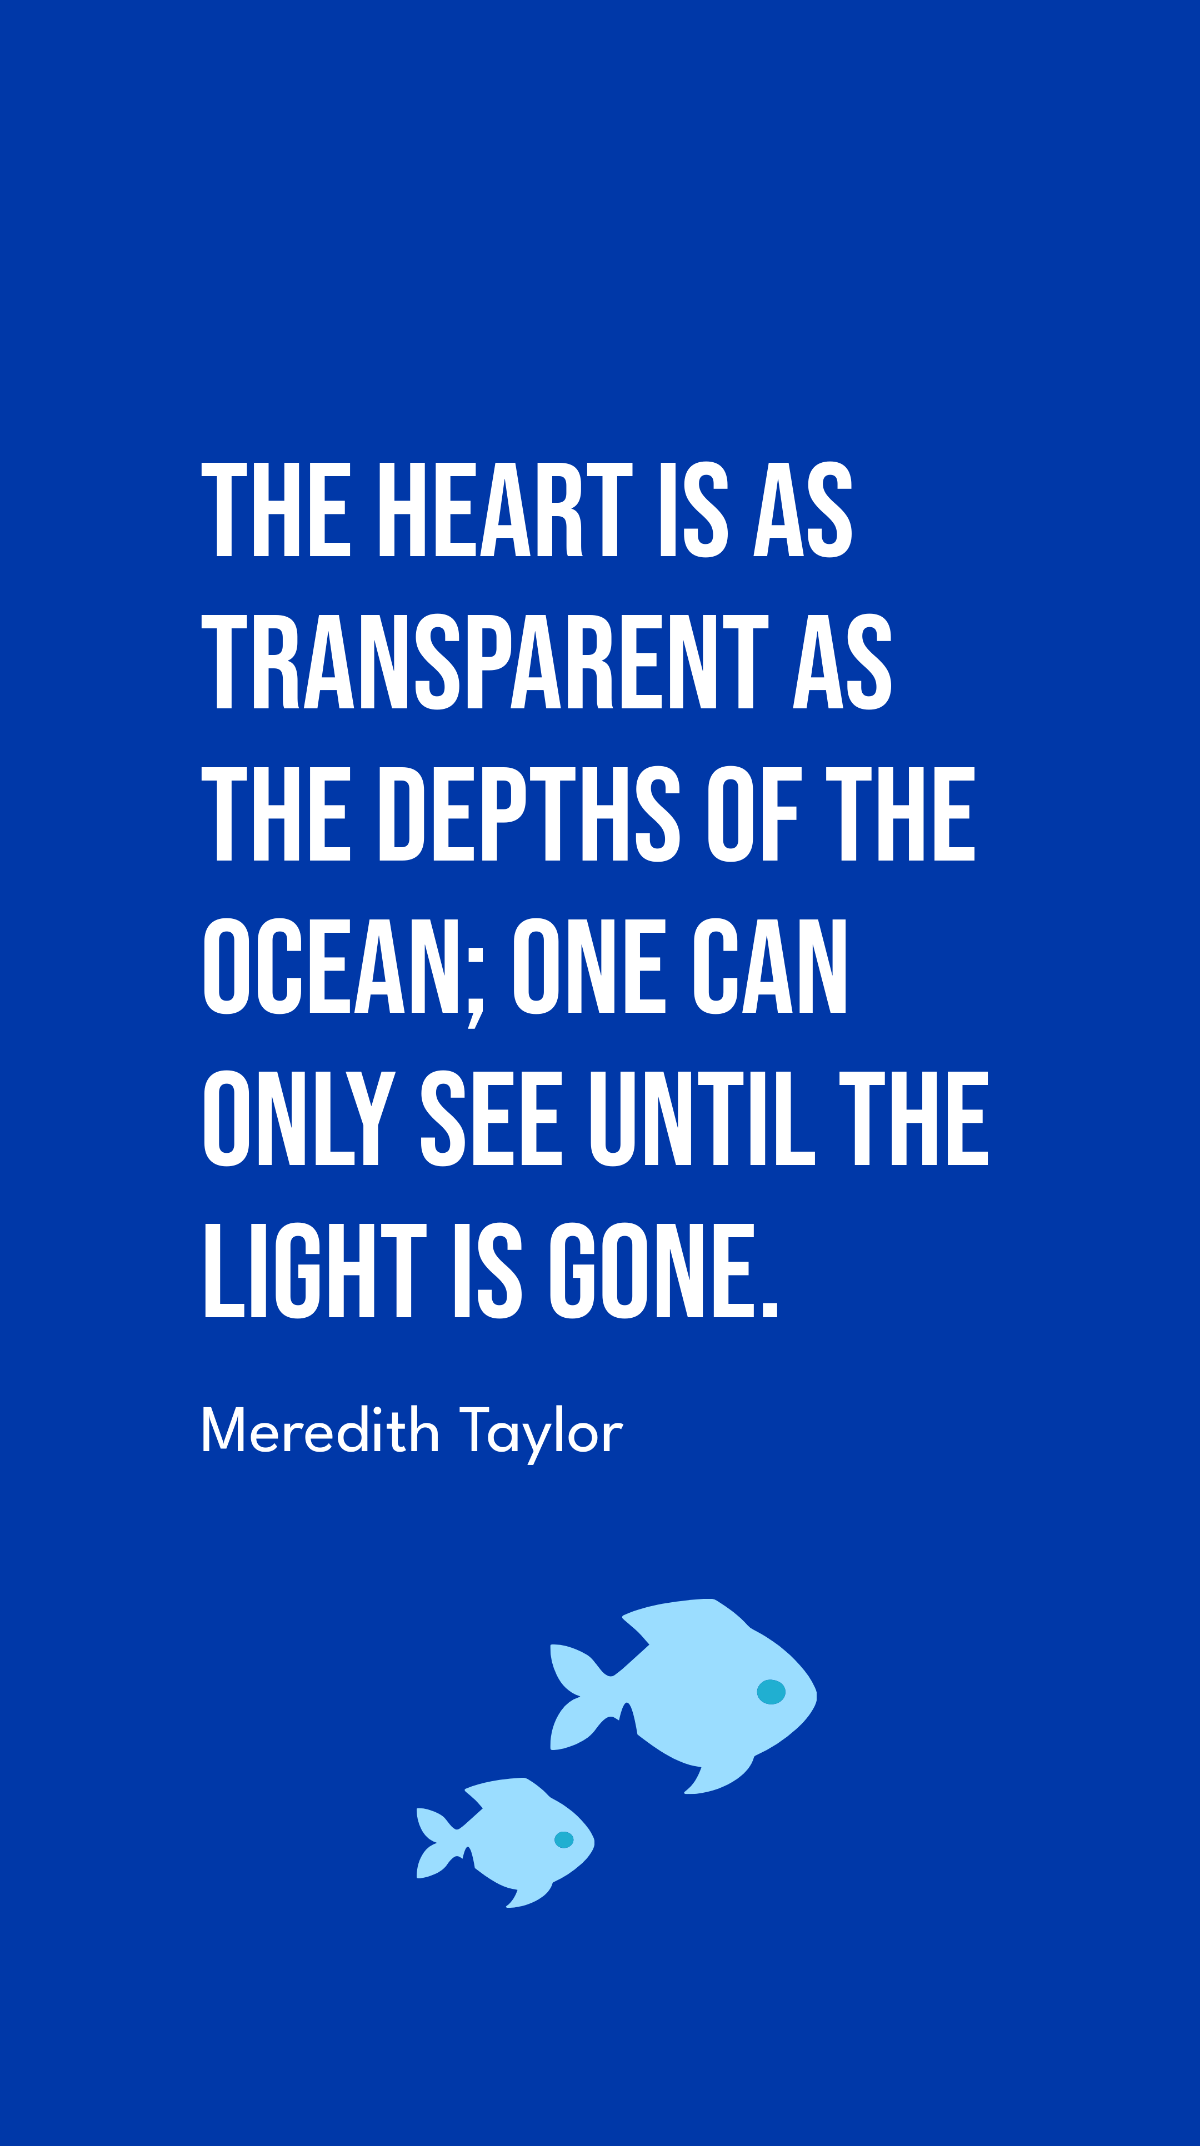 Meredith Taylor - The heart is as transparent as the depths of the ocean; one can only see until the light is gone.